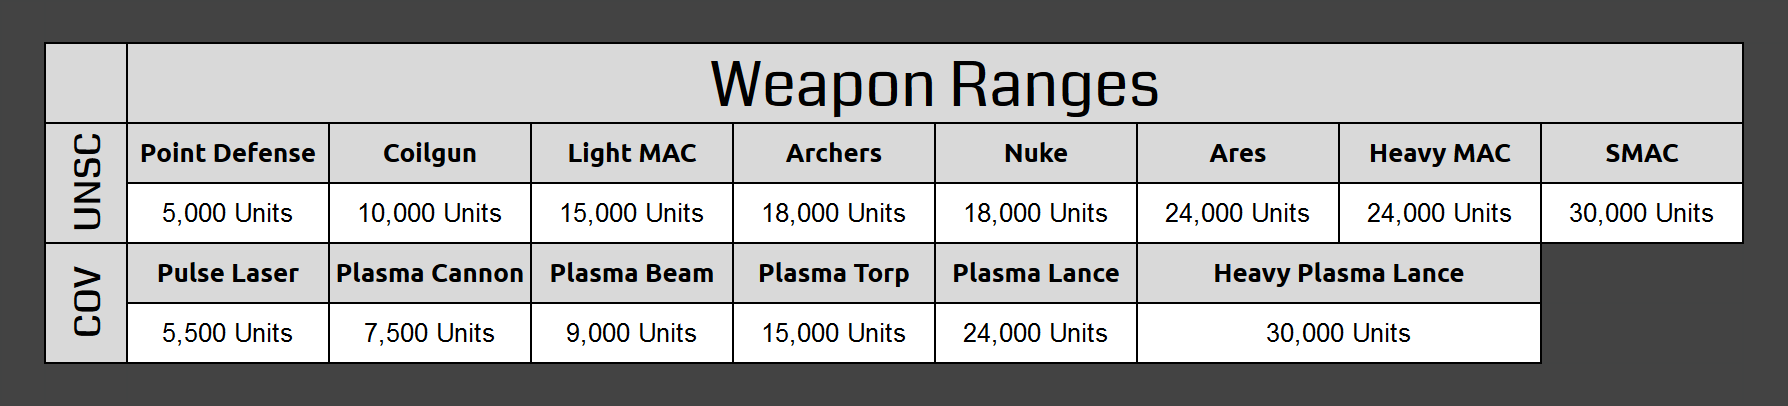 Weapon Ranges Chart